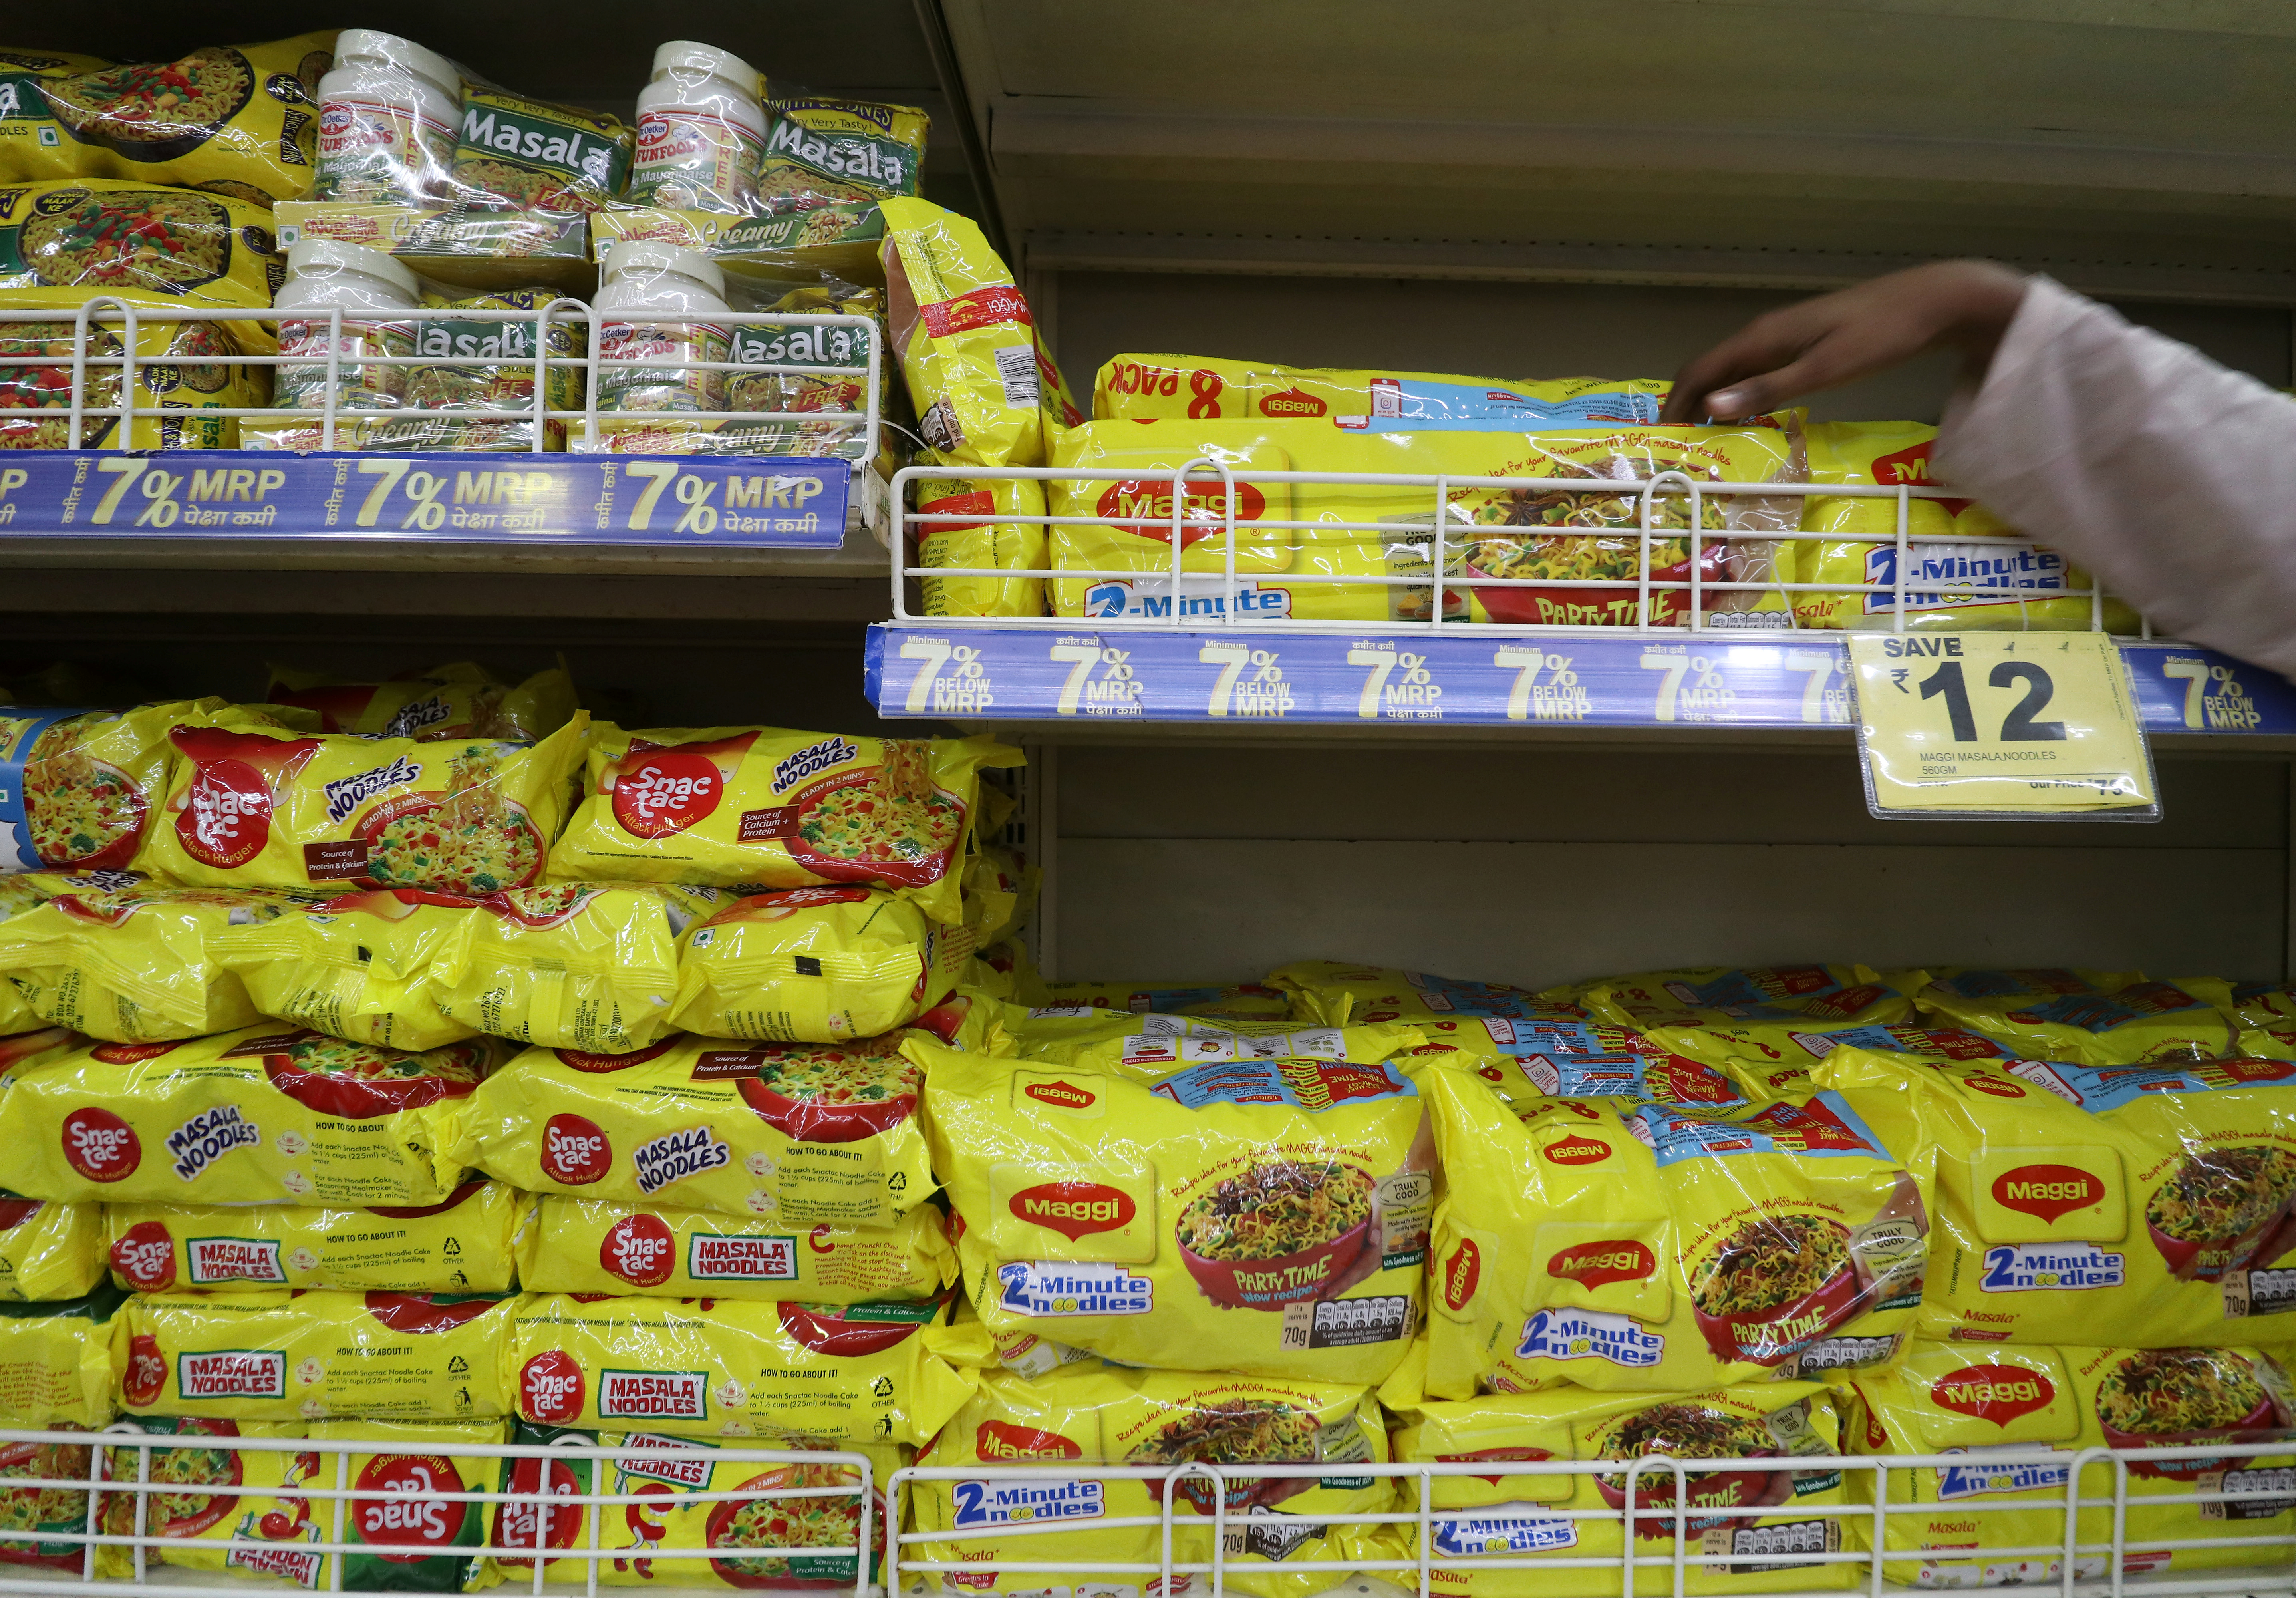 A worker arranges packets of Nestle's Maggi noodles next to Reliance's Snac tac noodles on a shelf inside a Reliance supermarket in Mumbai